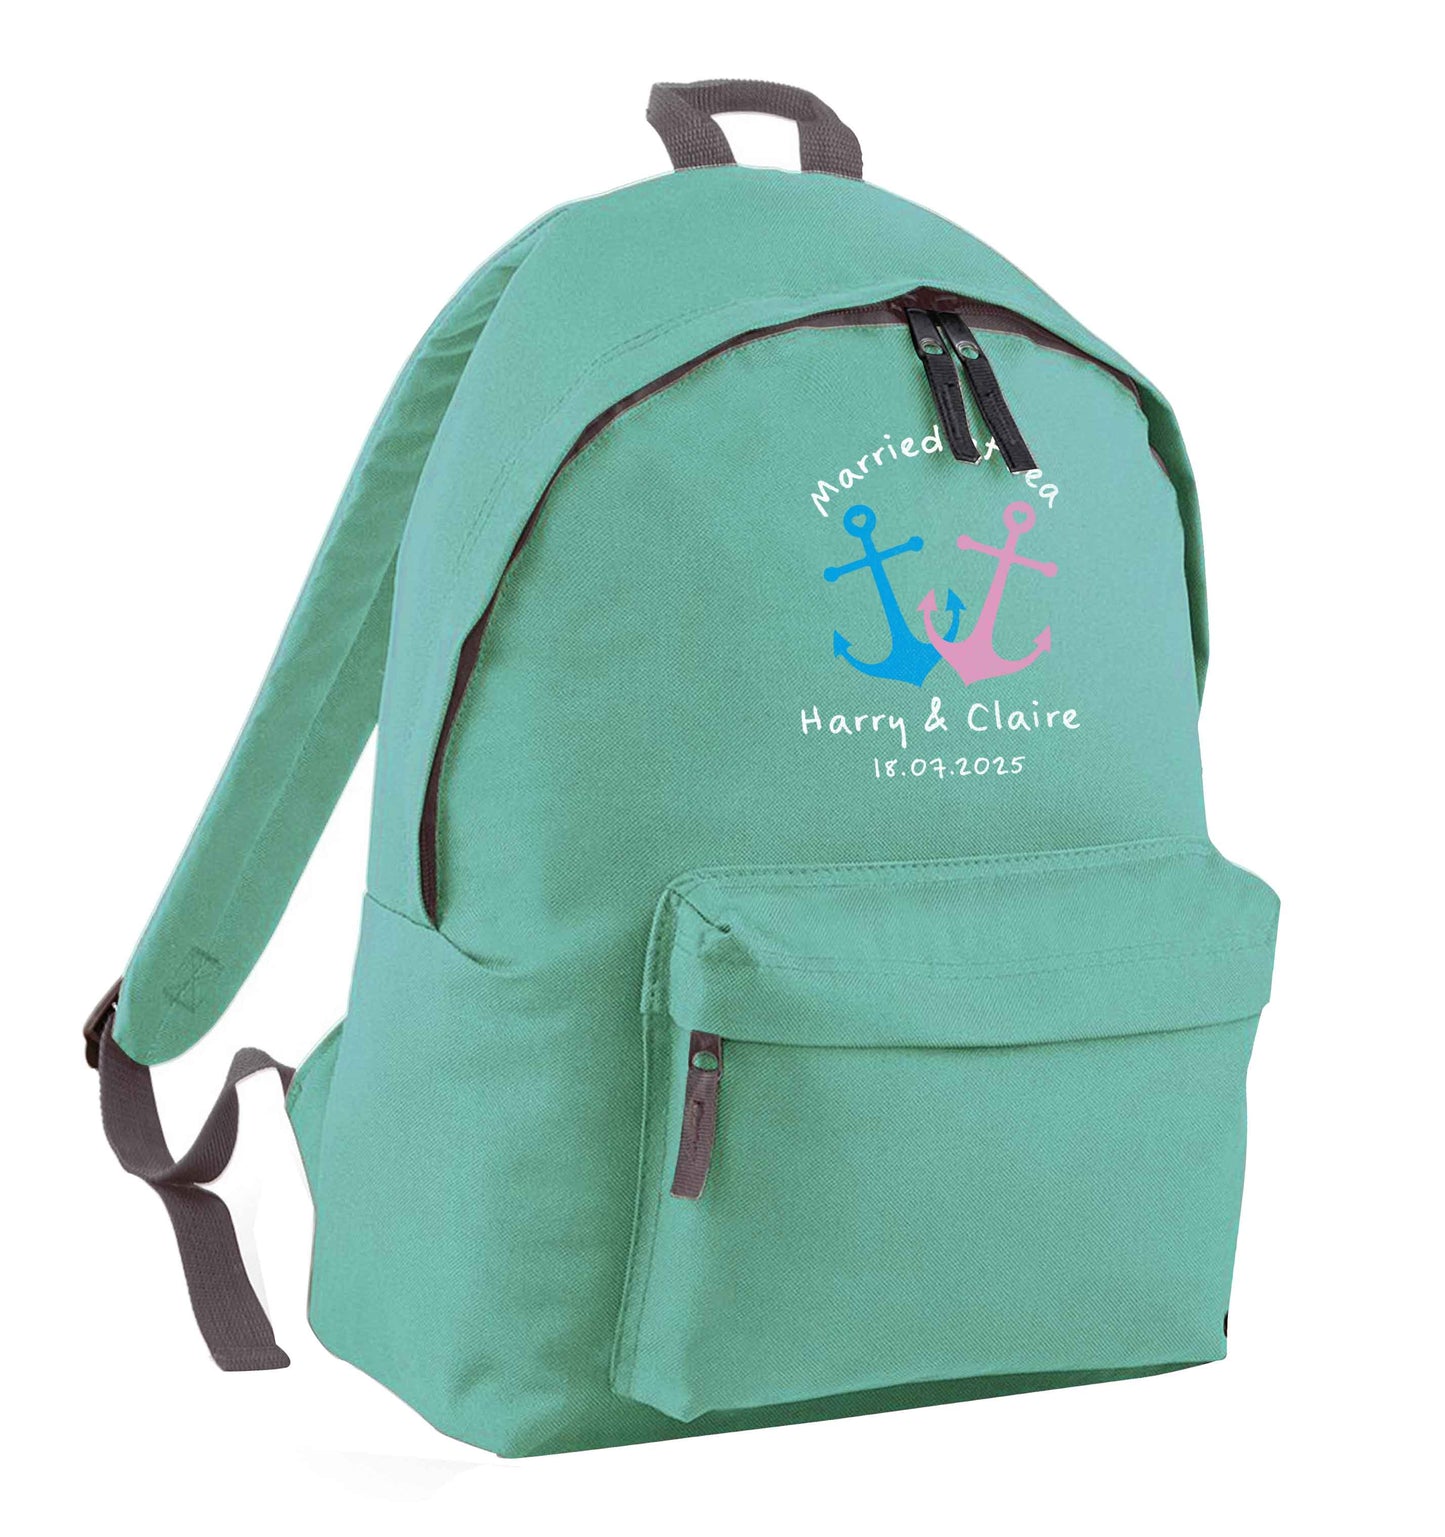 Married at sea mint adults backpack